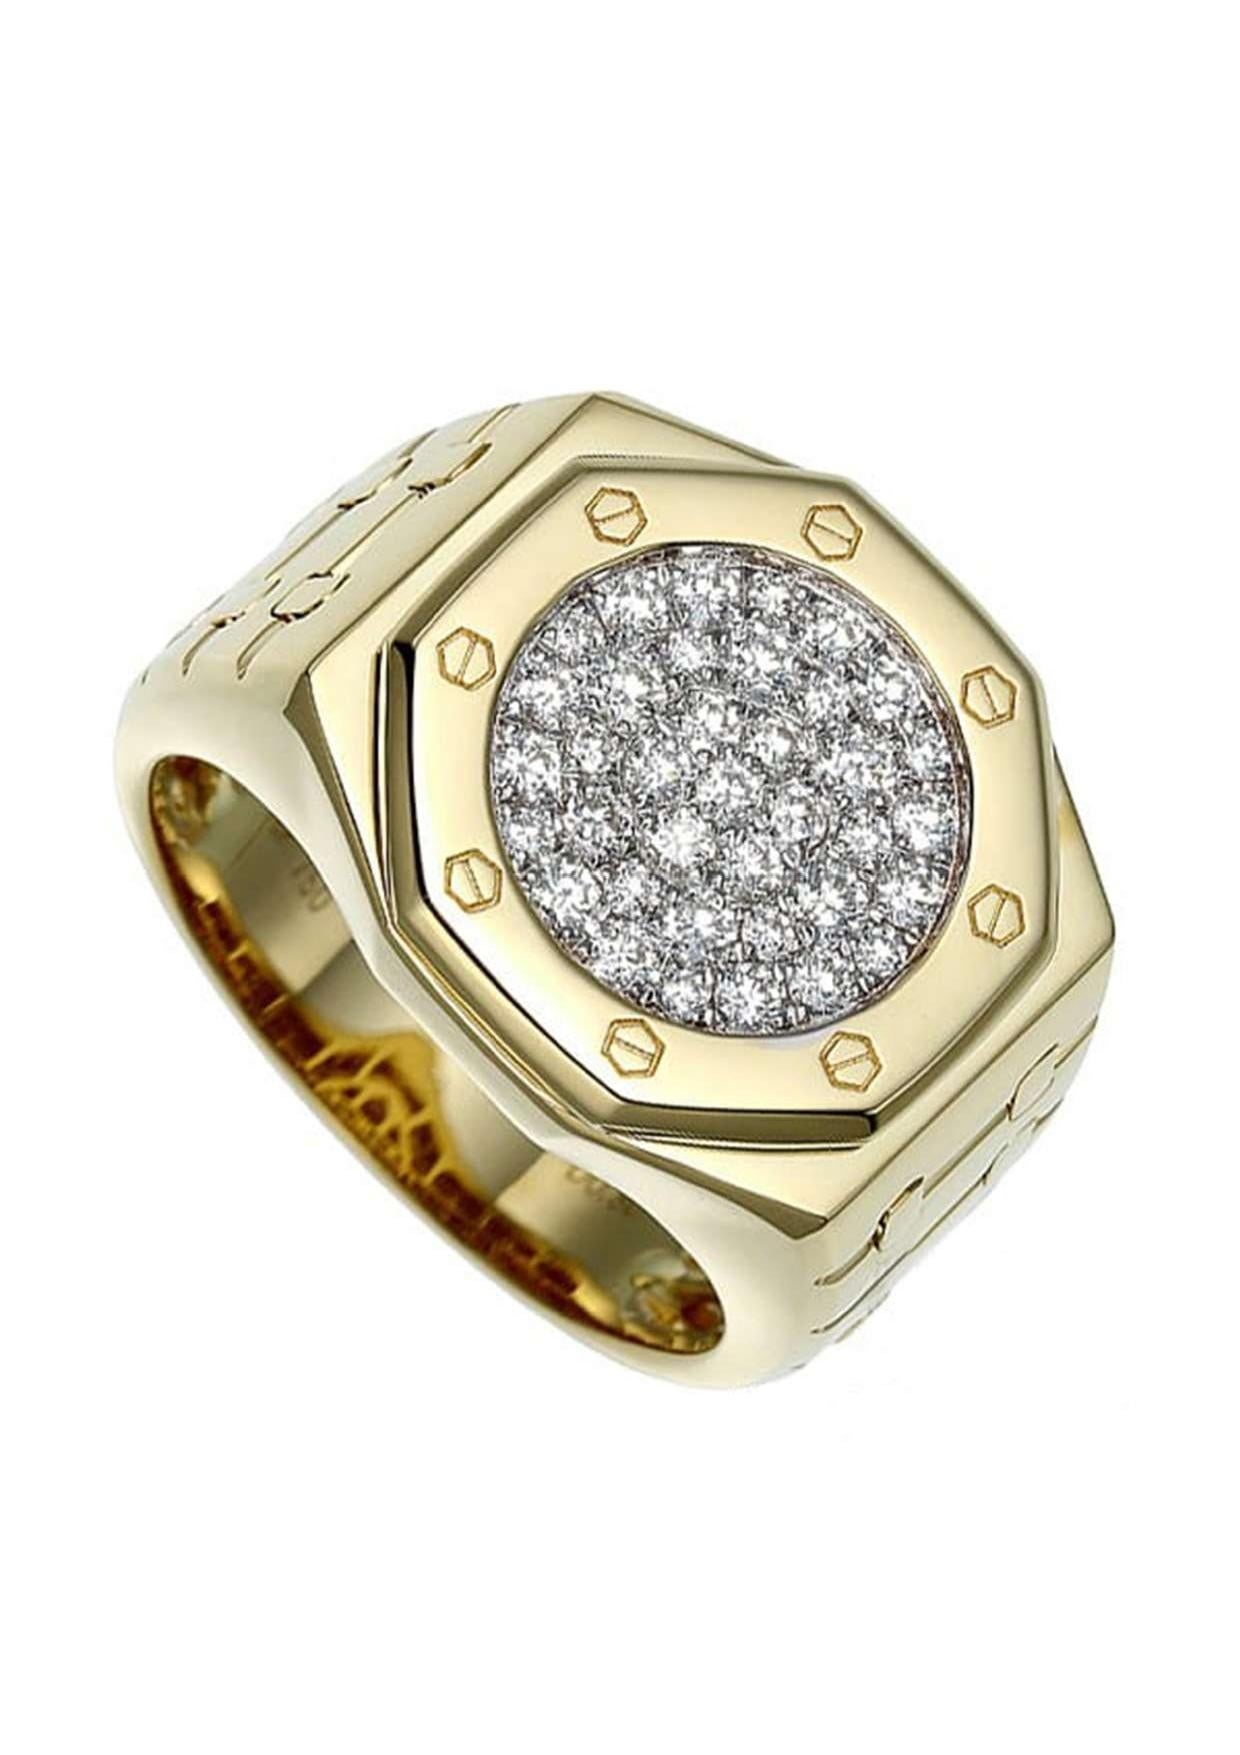 Enhance your jewelry collection with this unique 18K Yellow Gold Clock-Shaped Diamond Ring, featuring a stunning 0.80ct diamond.

Details:
* SKU: cin423-24
* Material: 18K Yellow Gold
* Jewelry Type: Ring
* Diamond Size: 0.80ct
* Ring Size: